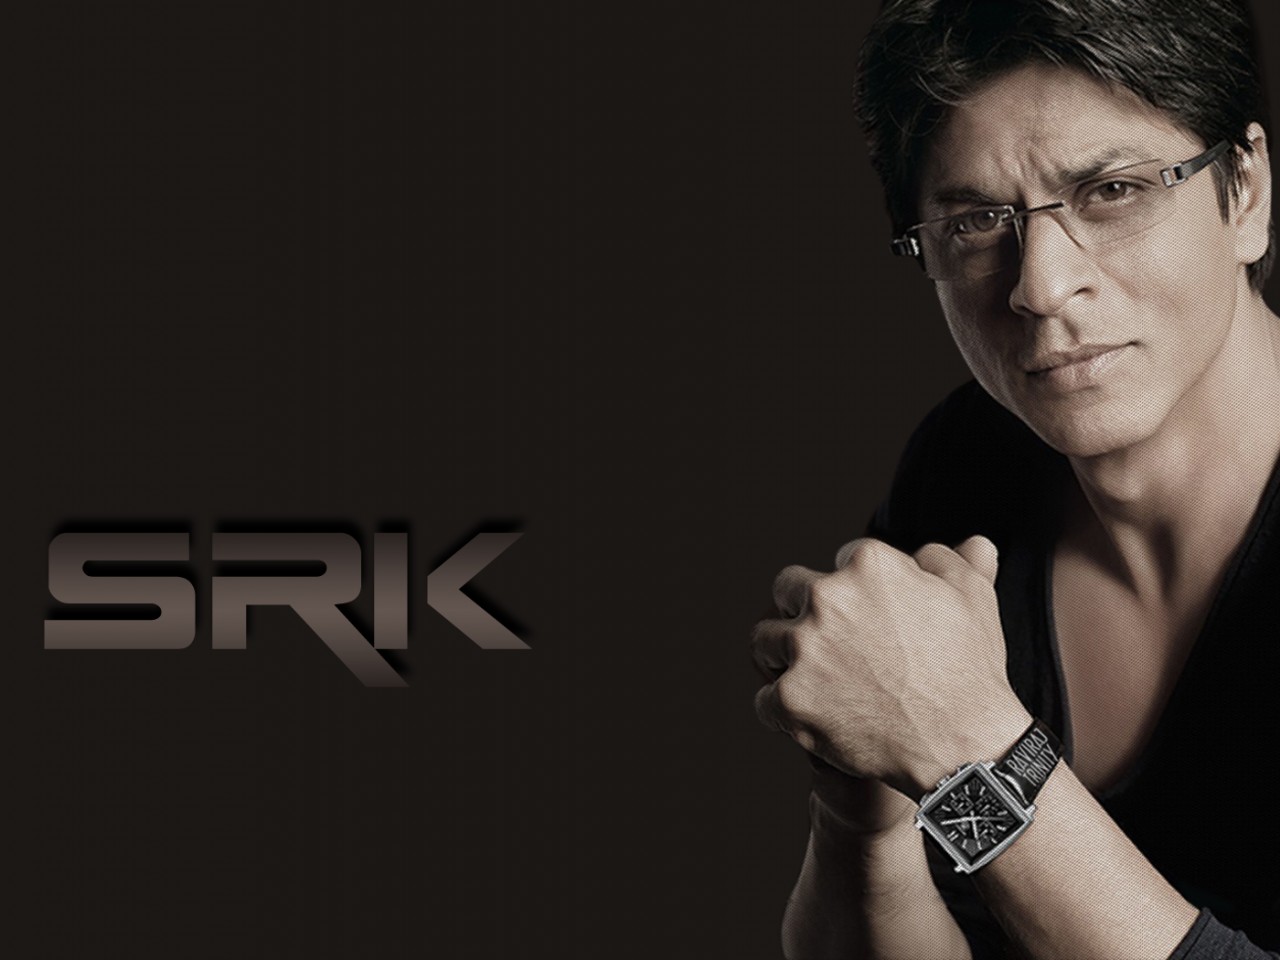 Download Free HD Wallpapers of Shahrukh Khan Download Free HD